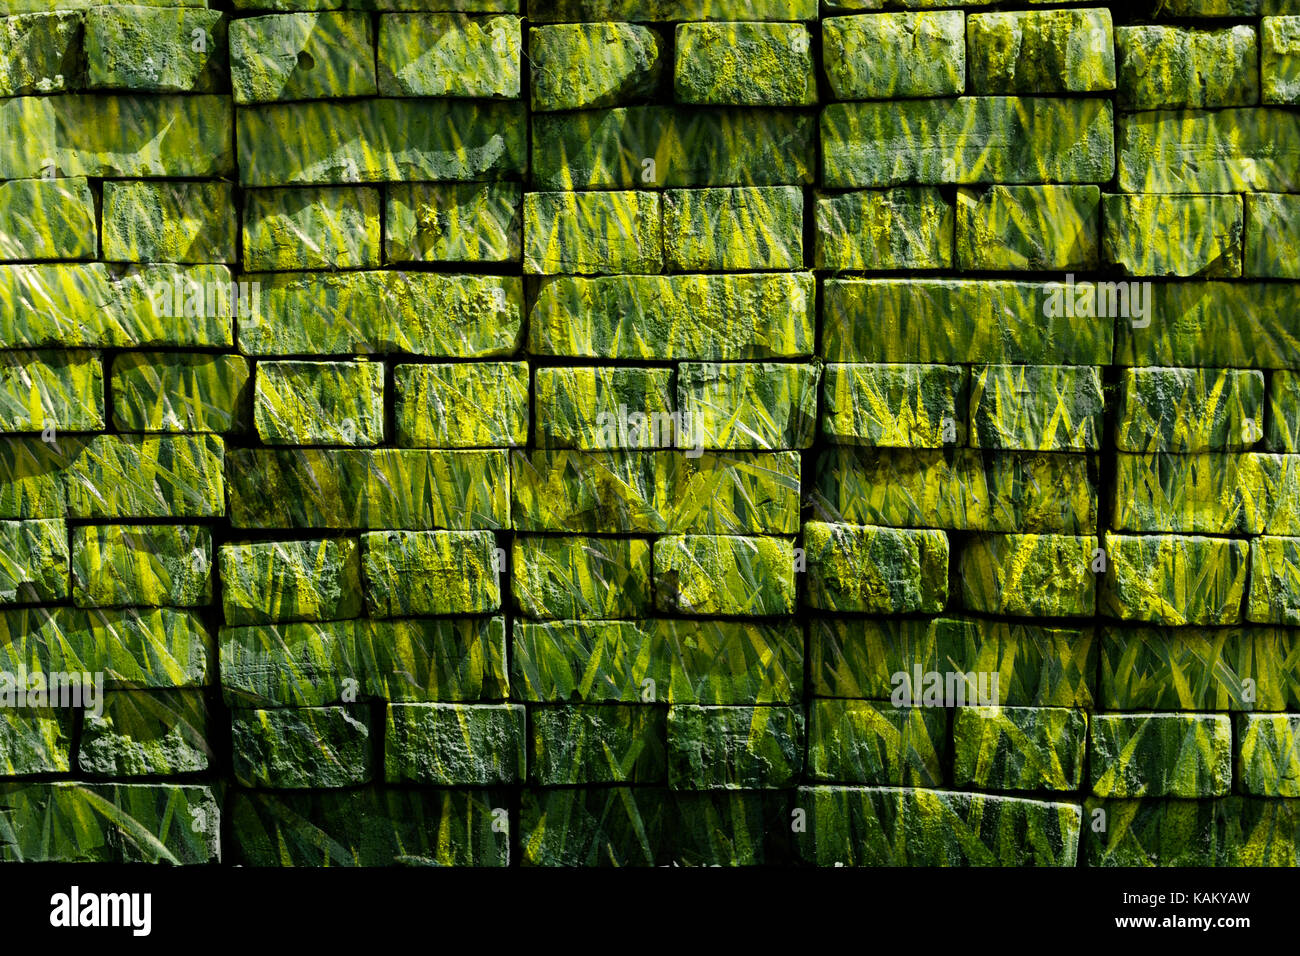 Eco friendly building material Stock Photo